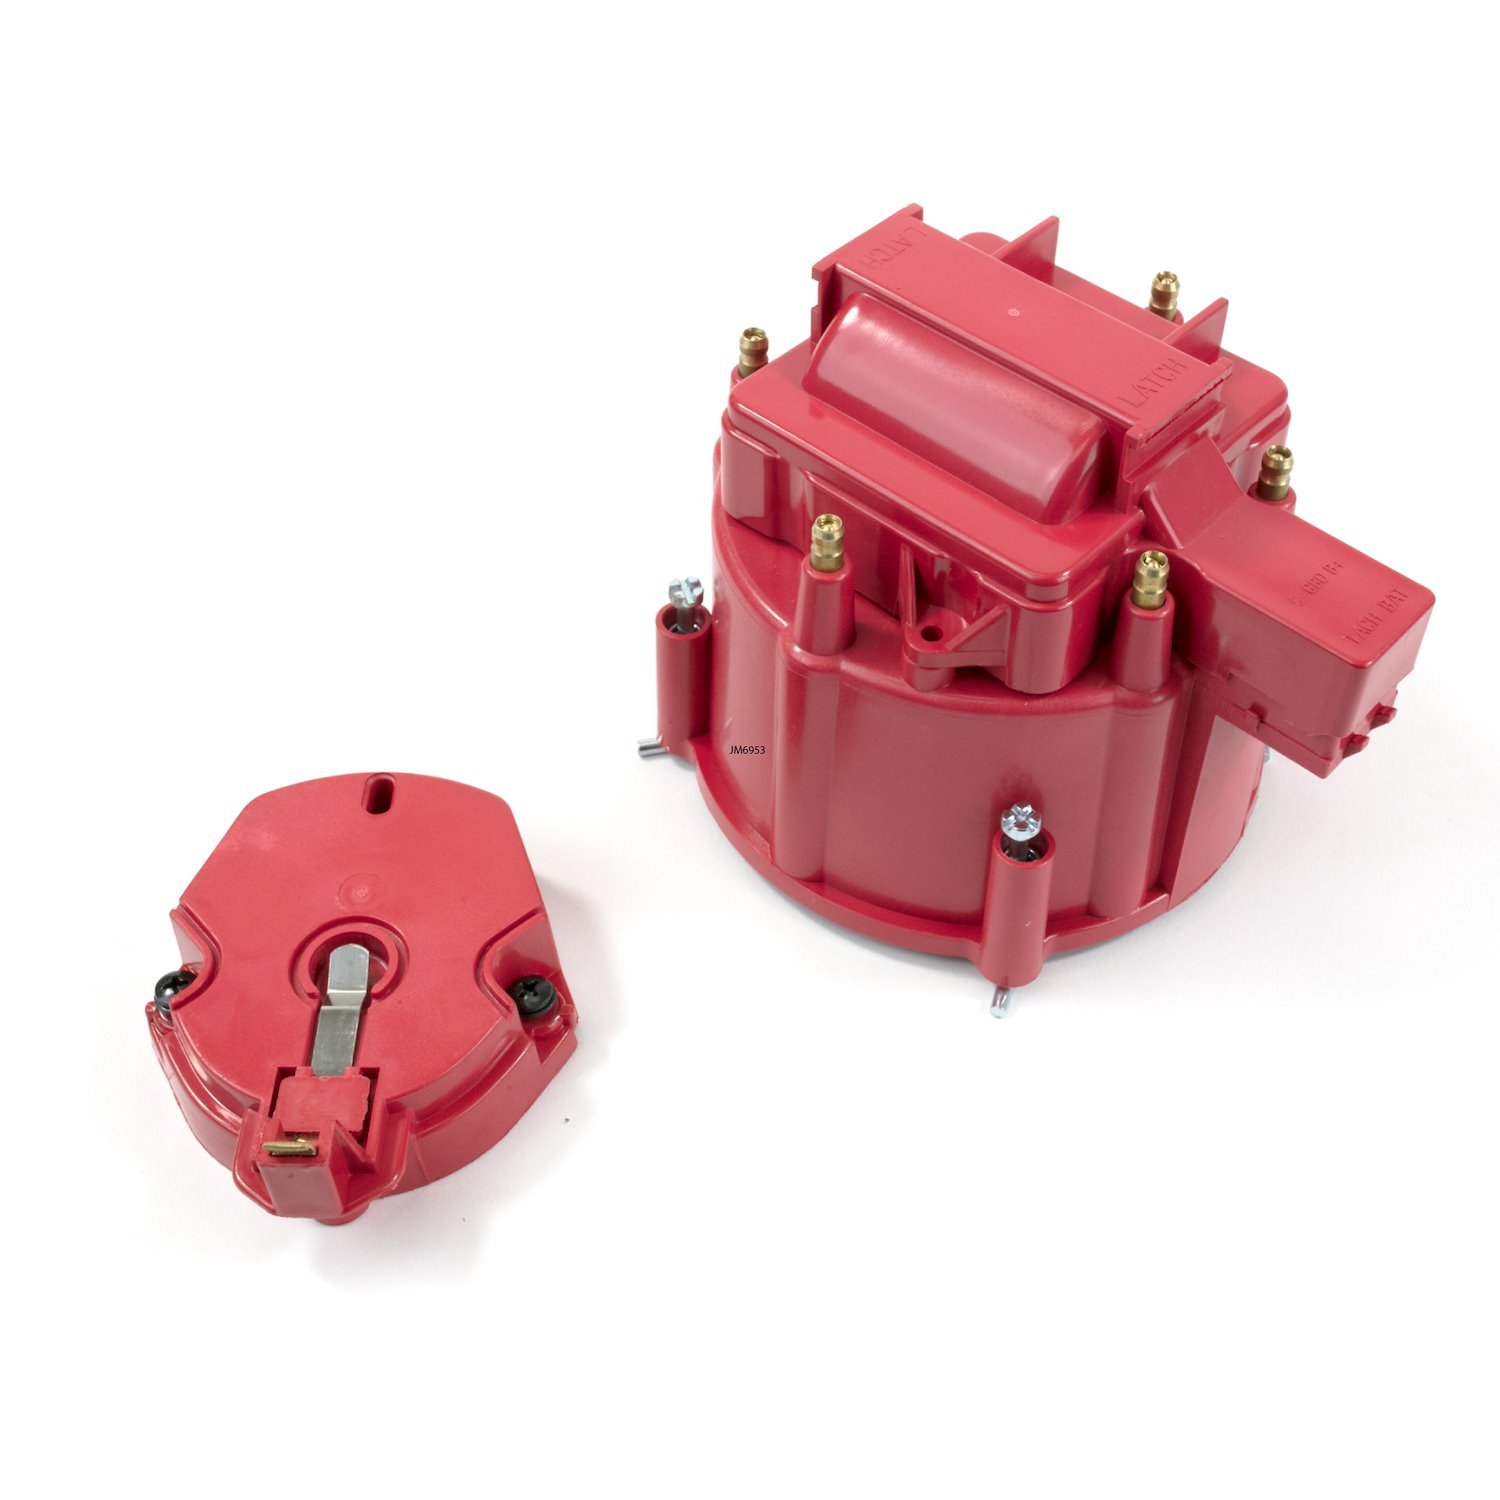 JM6953R HEI Distributor Standard Cap and Rotor Kit, 6 Cylinder Male, Red